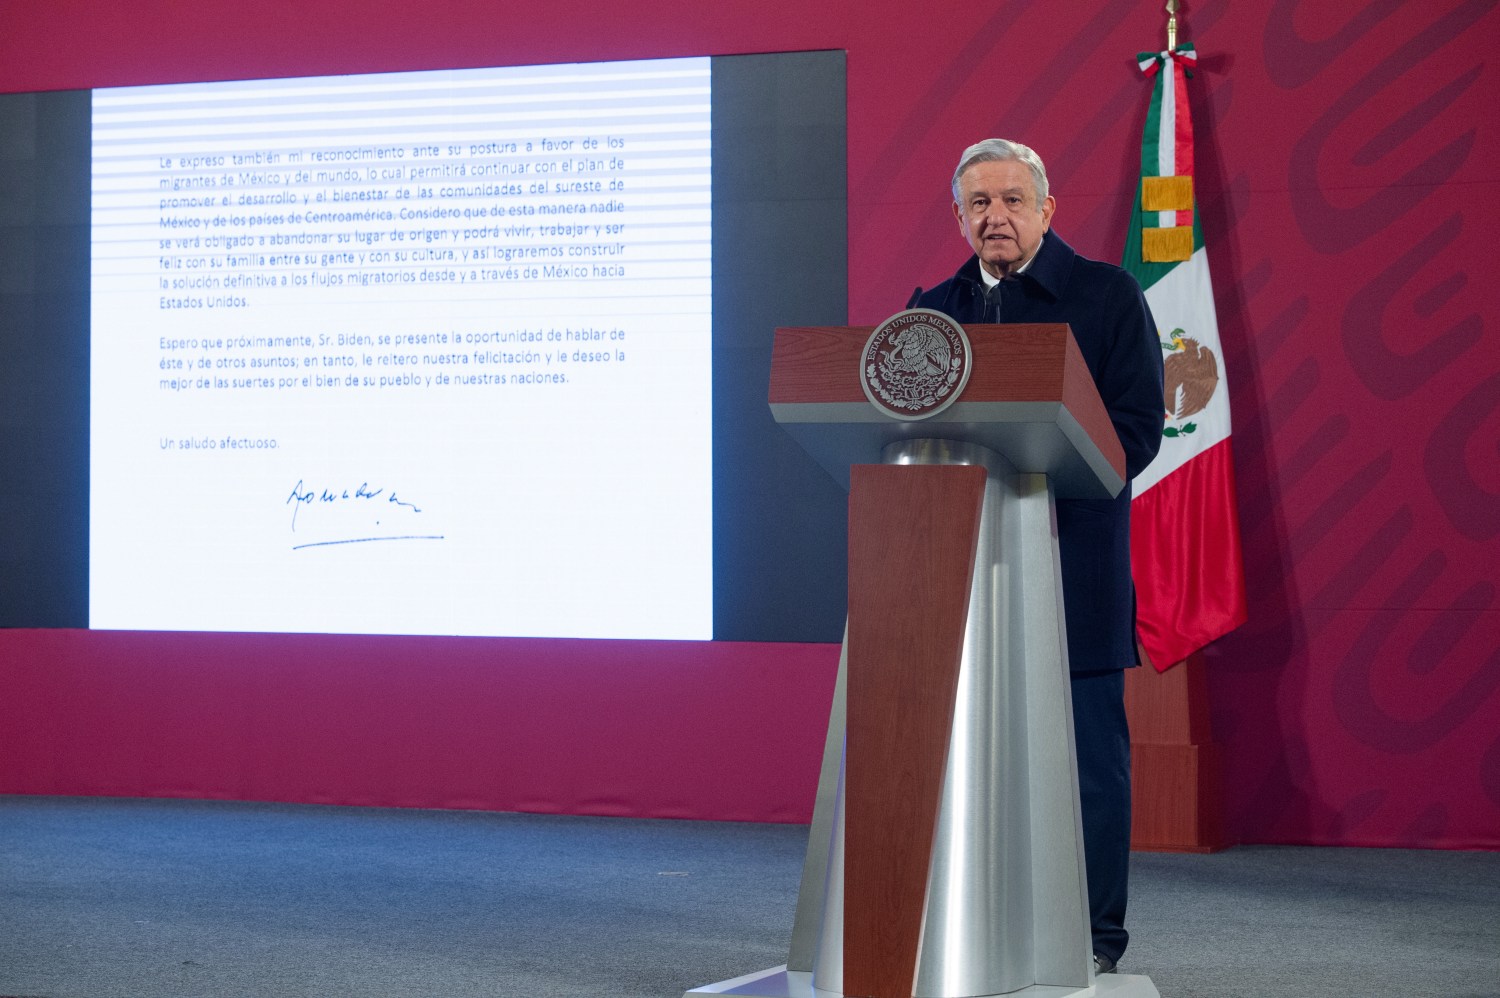 Mexico's President Andres Manuel Lopez Obrador speaks as a screen displays the letter he sent to U.S. President-elect Joe Biden during a news conference at the National Palace, in Mexico City, Mexico December 15, 2020. Mexico's Presidency/Handout via REUTERS ATTENTION EDITORS - THIS IMAGE HAS BEEN SUPPLIED BY A THIRD PARTY. NO RESALES. NO ARCHIVES